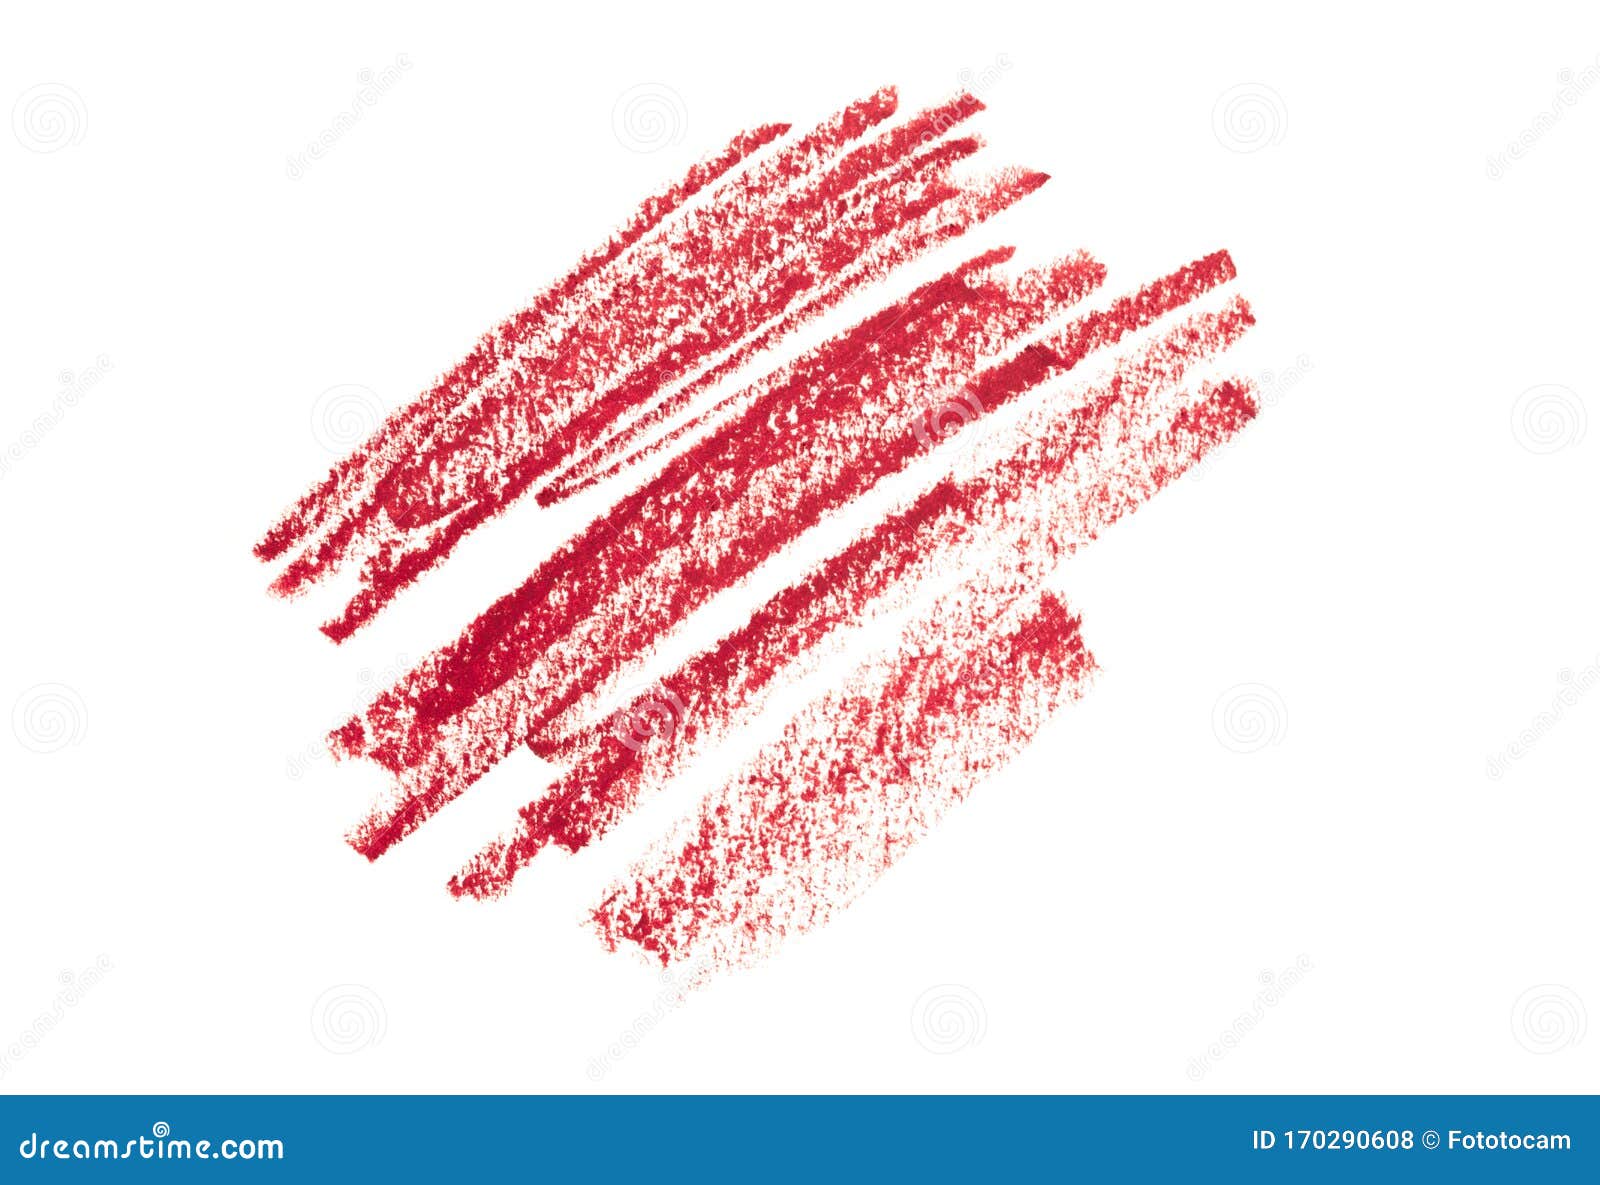 lipstick liner pencil squiggles  on white background  - image